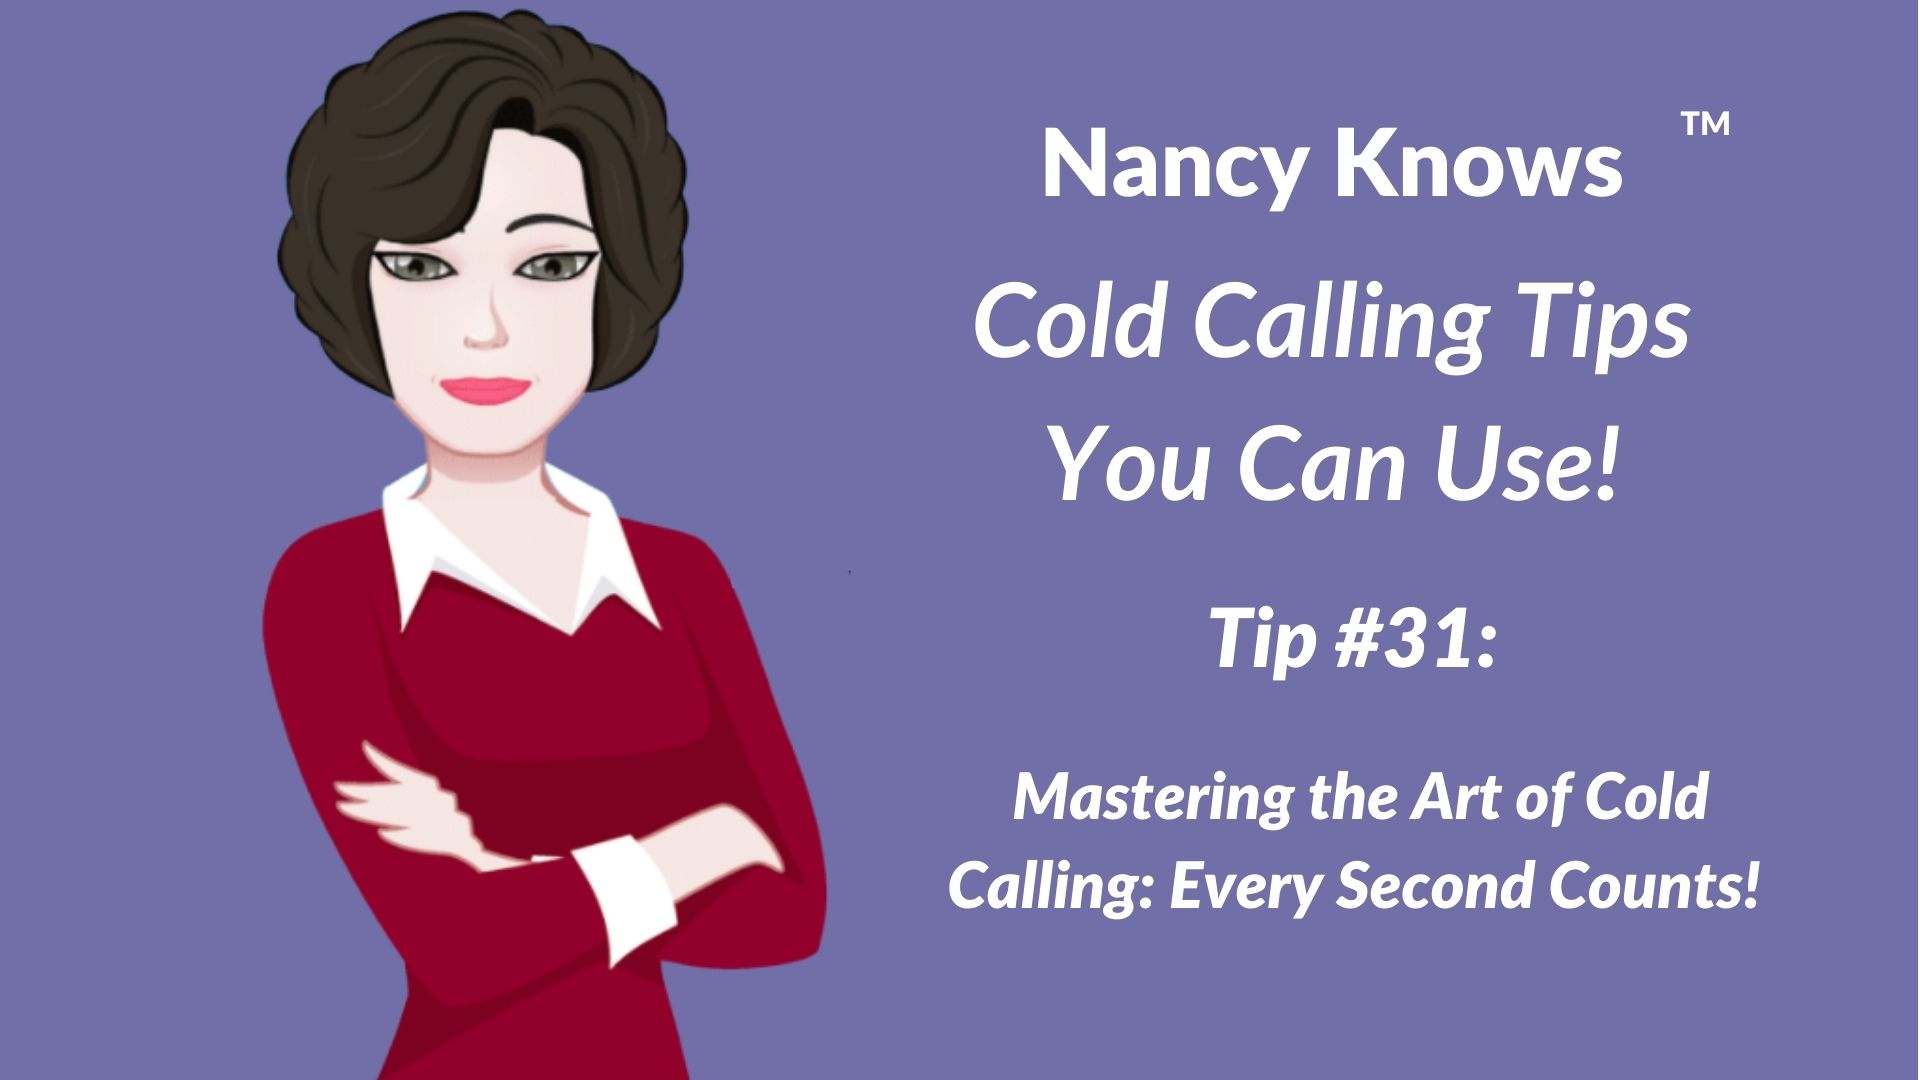 Nancy Knows #31: Mastering the Art of Cold Calling: Every Second Counts!